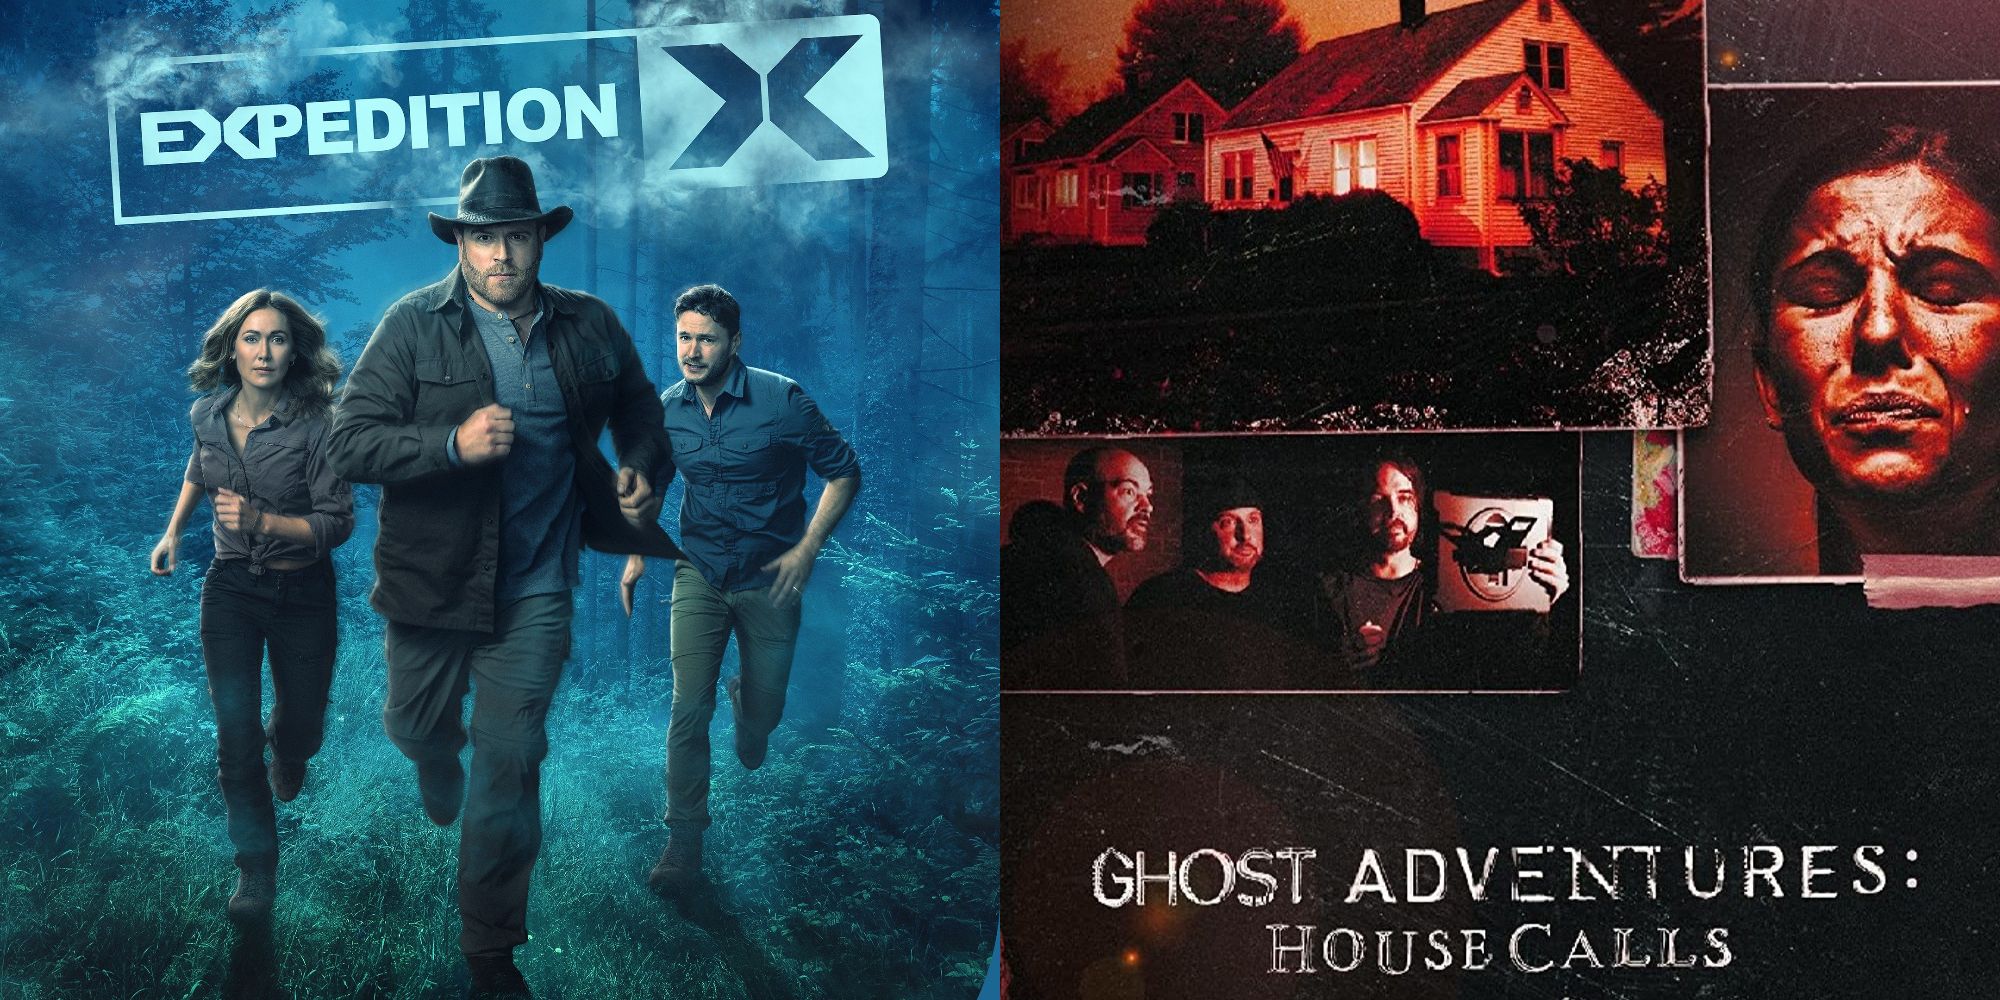 Split image showing posters for Expedition X and Ghost Adventures House Calls.